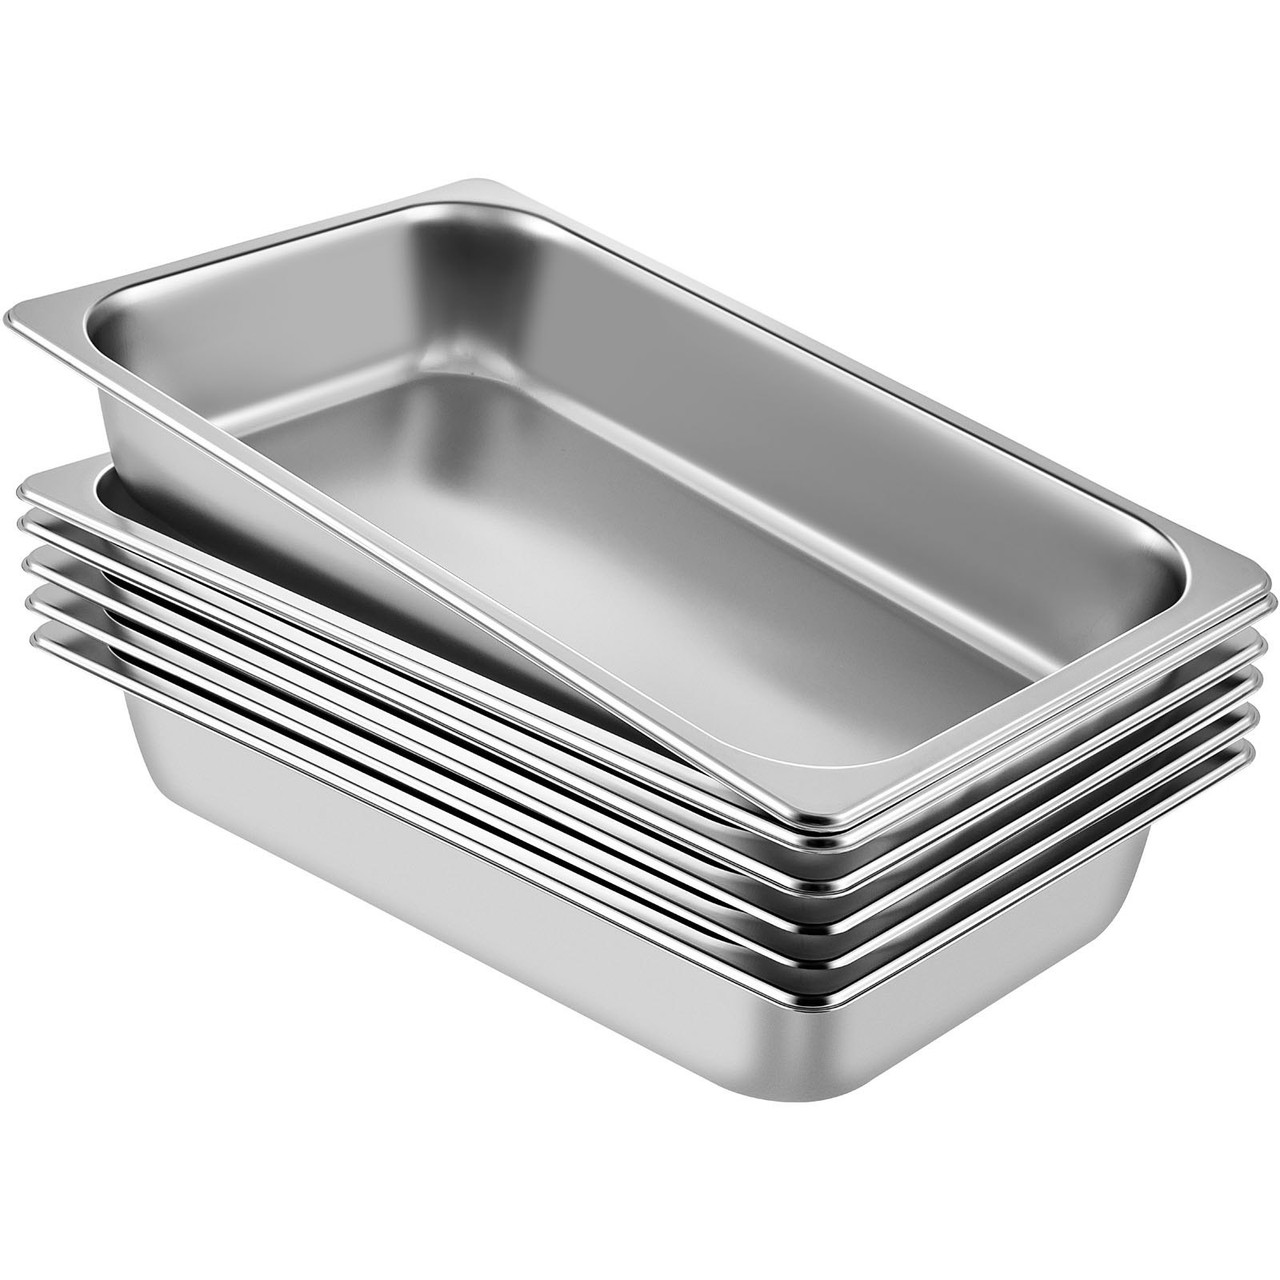 Hotel Pans Full Size 4-Inch Deep, Steam Table Pan Pack 22 Gauge/0.8mm  Thick Stainless Steel Full Size Hotel Pan Anti Jam Steam Table Pan